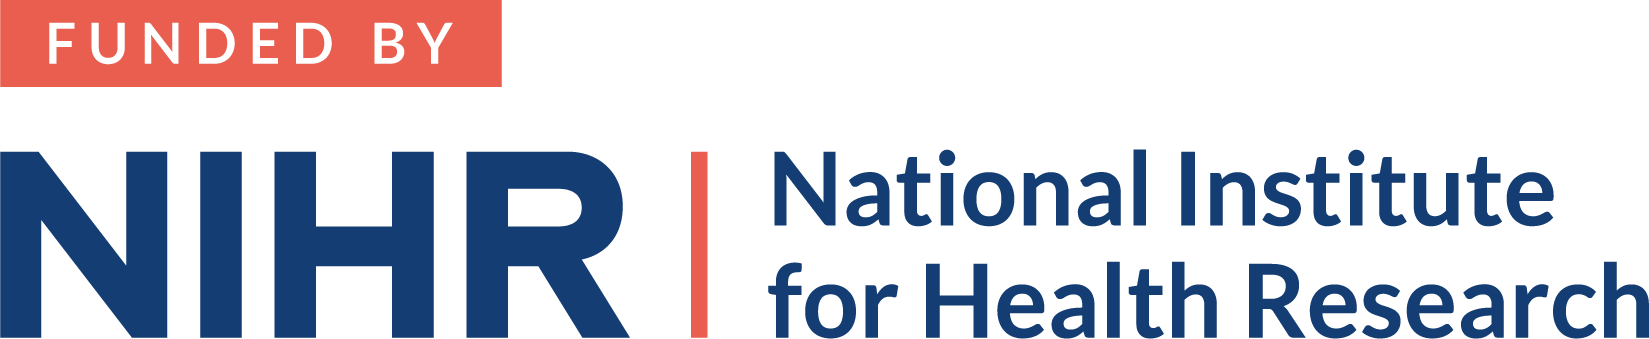 Funded by NIHR | National Institute for Health Research